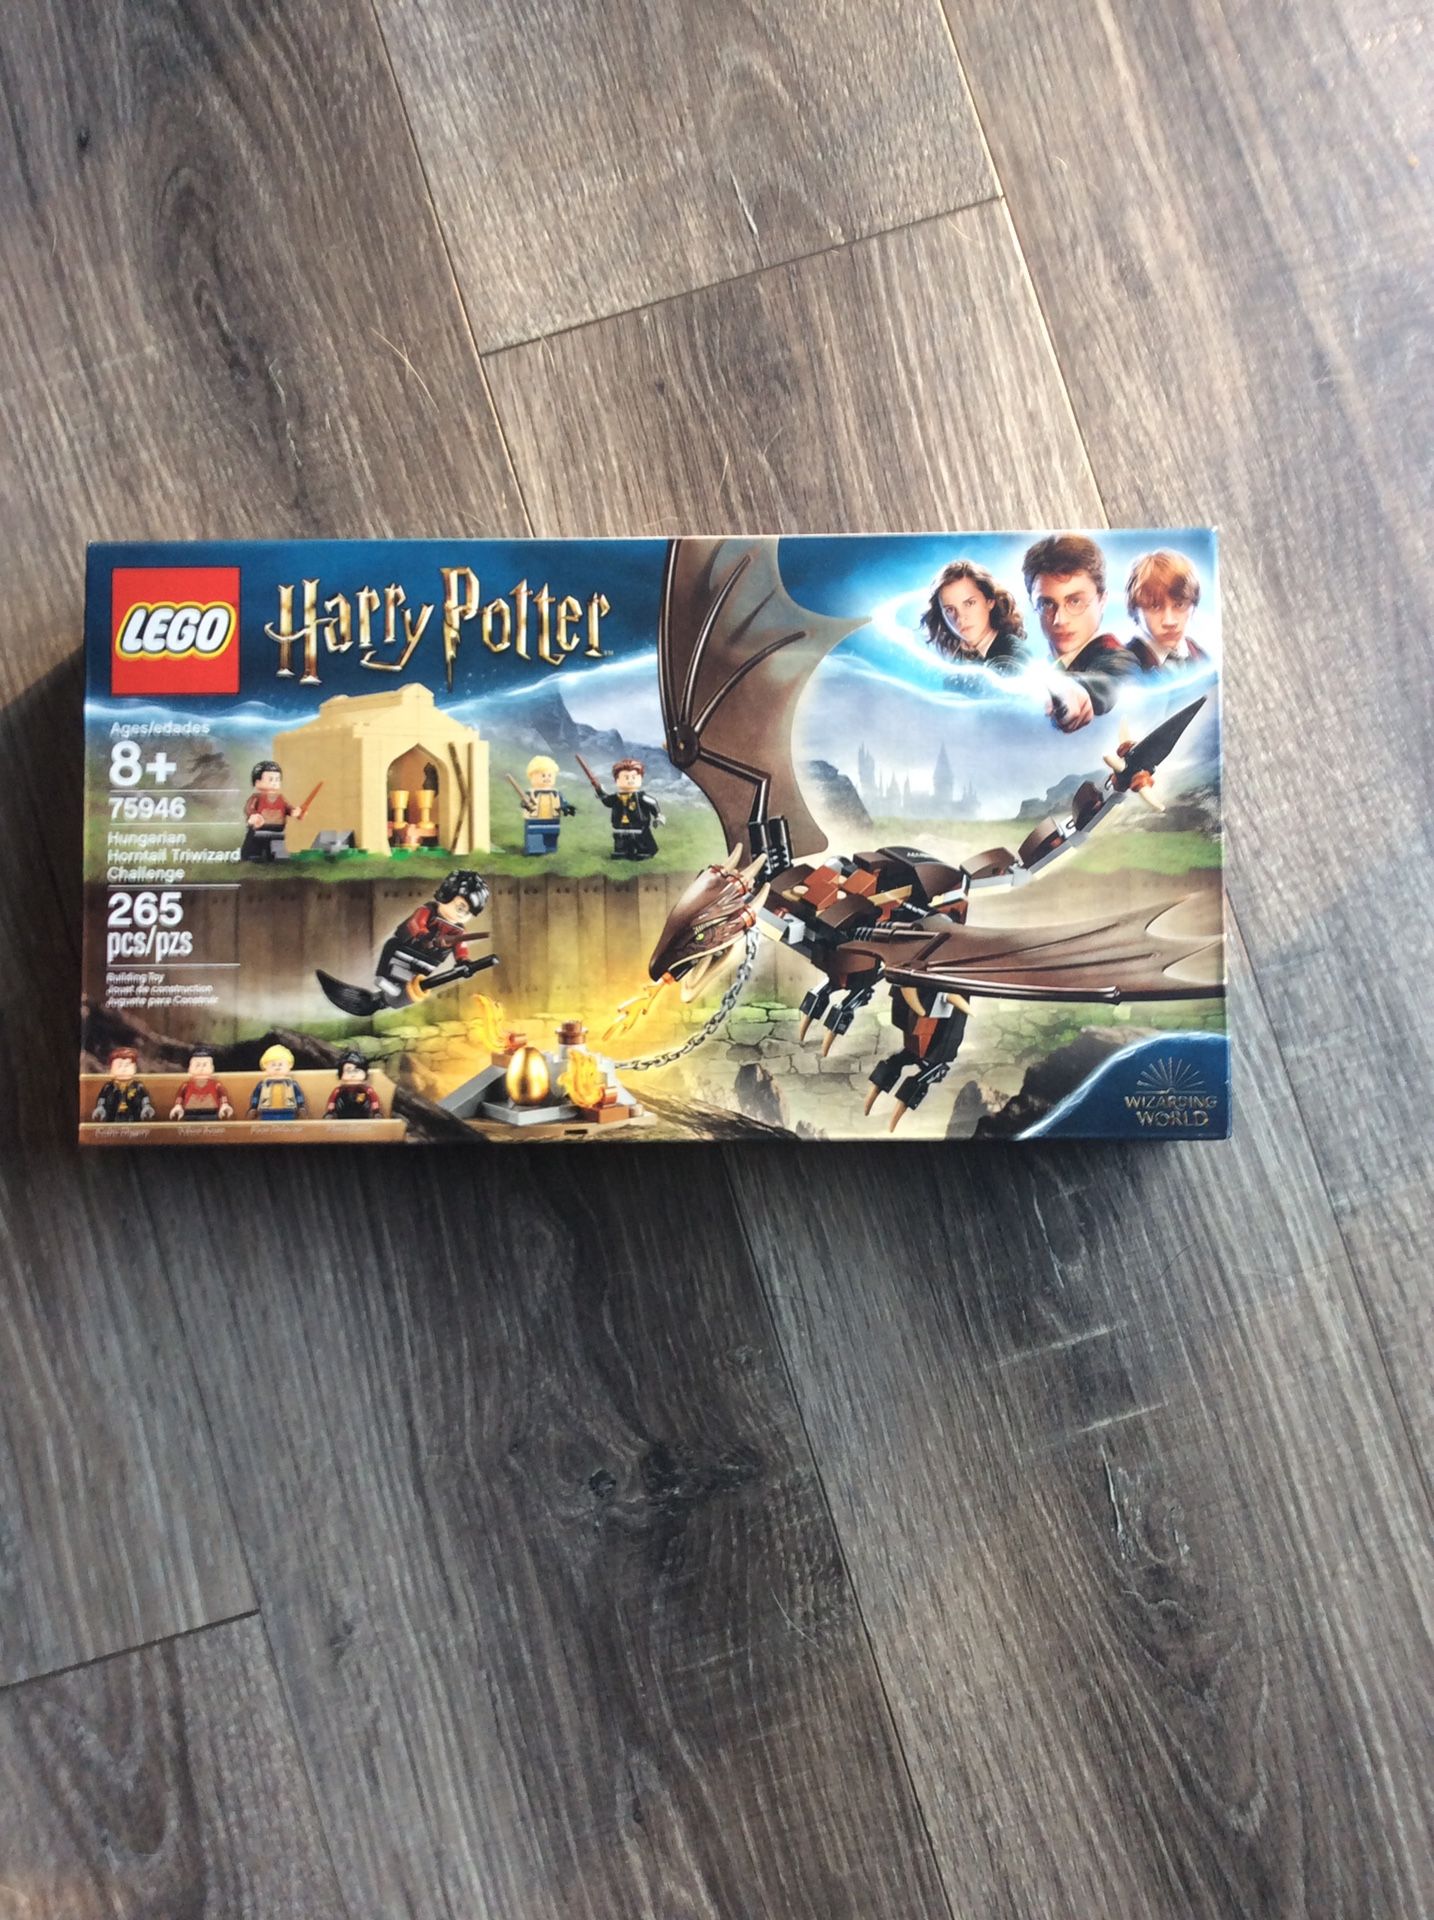 Harry Potter Hungarian horntail lego set